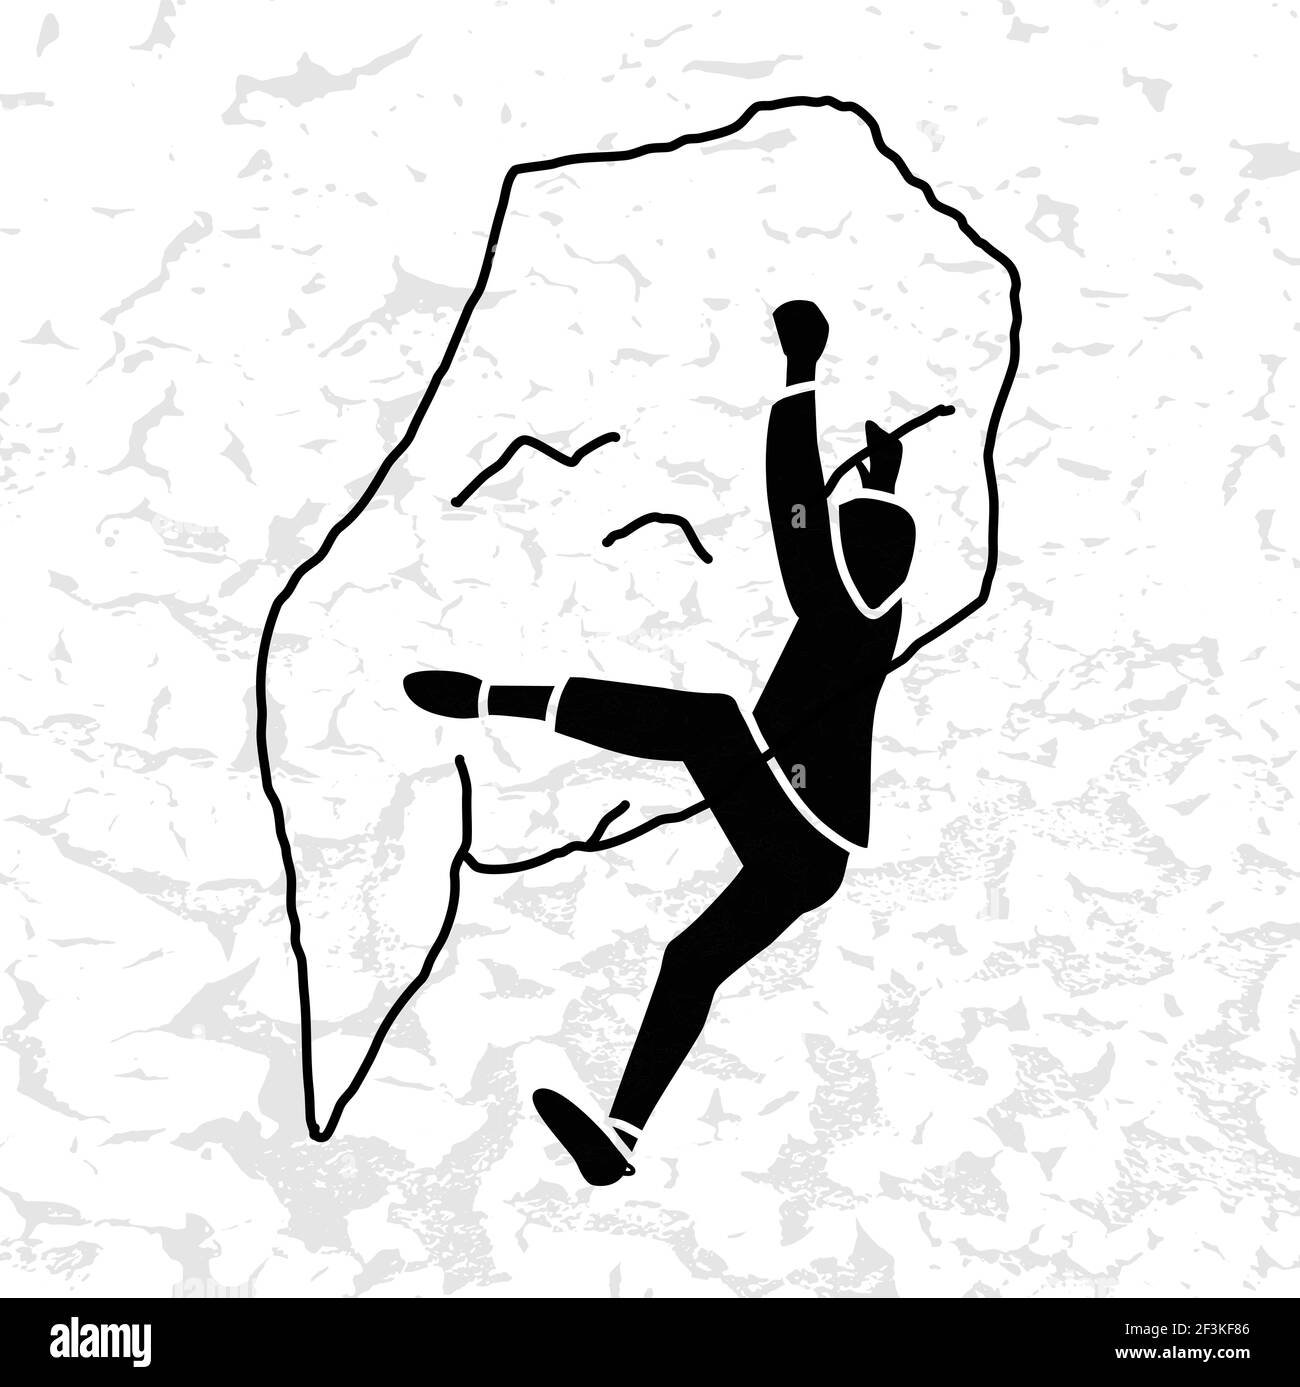 Climber silhouette an a rock vector illustration. Rock climbing badge. Men doing extreme sport, adrenaline activity of strong men. Climber without a r Stock Vector